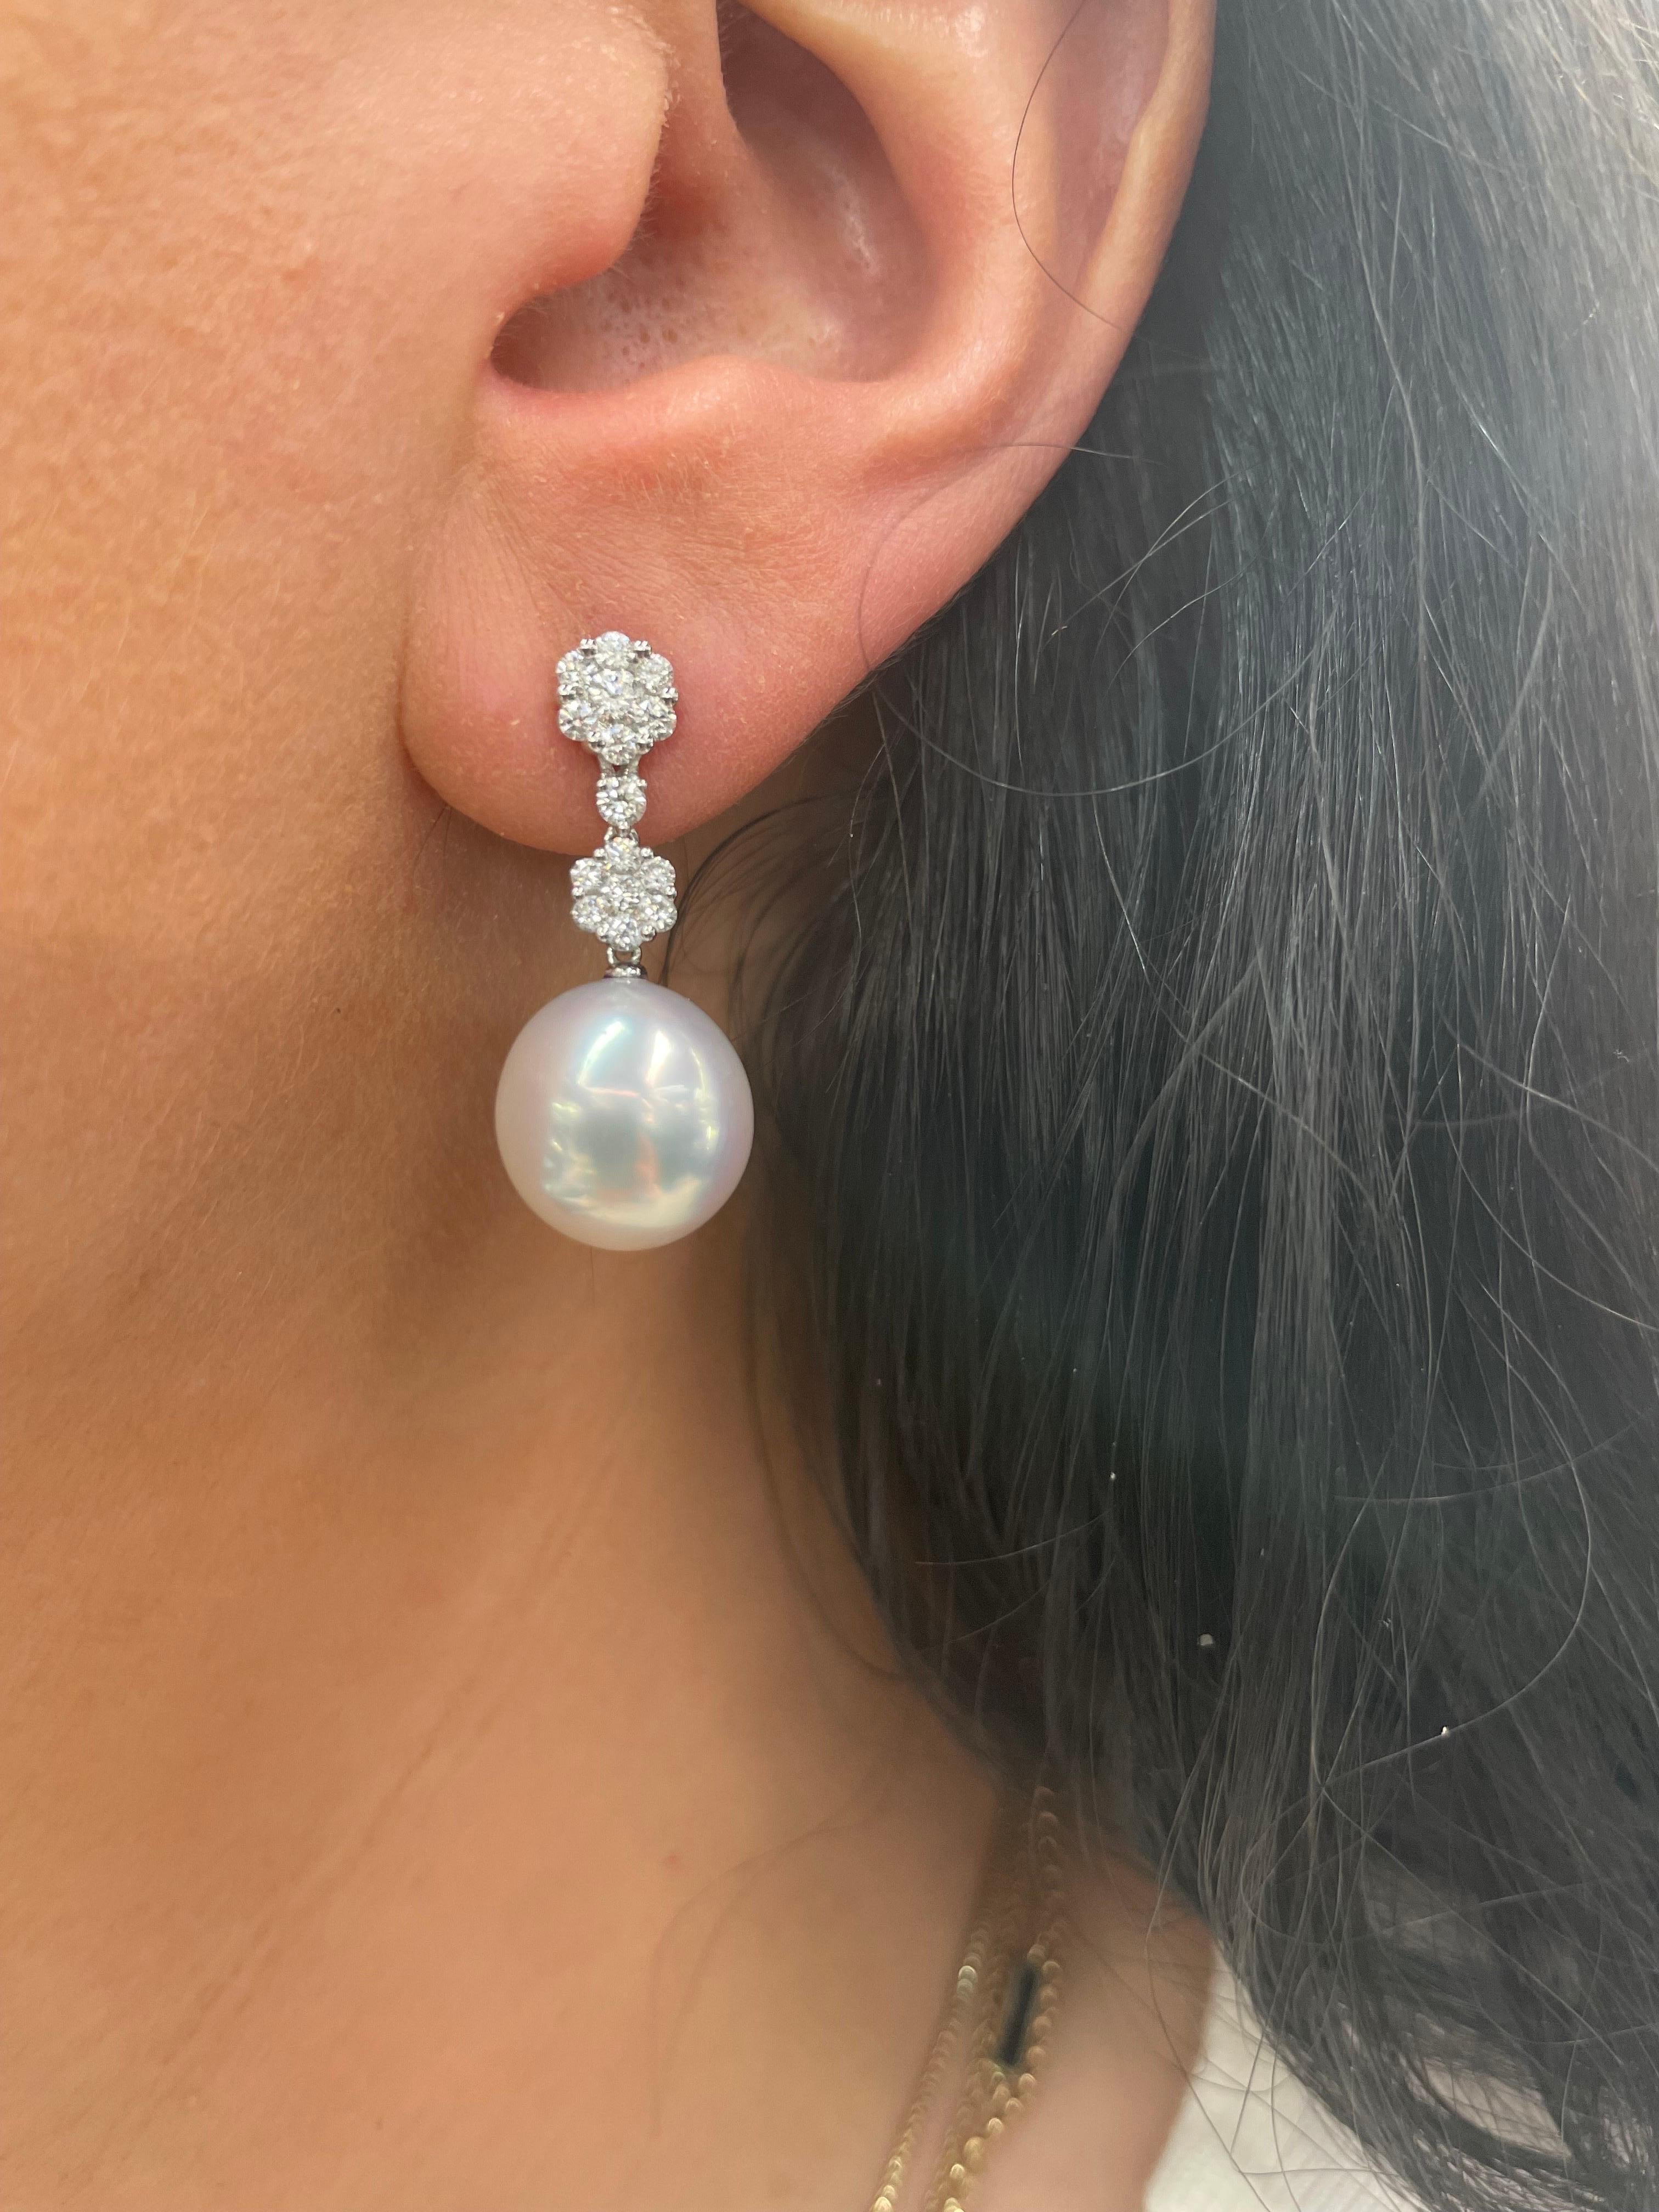 18 Karat White gold drop earrings featuring two South Sea Pearls measuring 11-12 mm and four diamond clusters containing 30 diamonds weighing 0.79 carats.
Pearl can be changed to Tahitian, Golden or Pink Pearl.
DM for more information.
